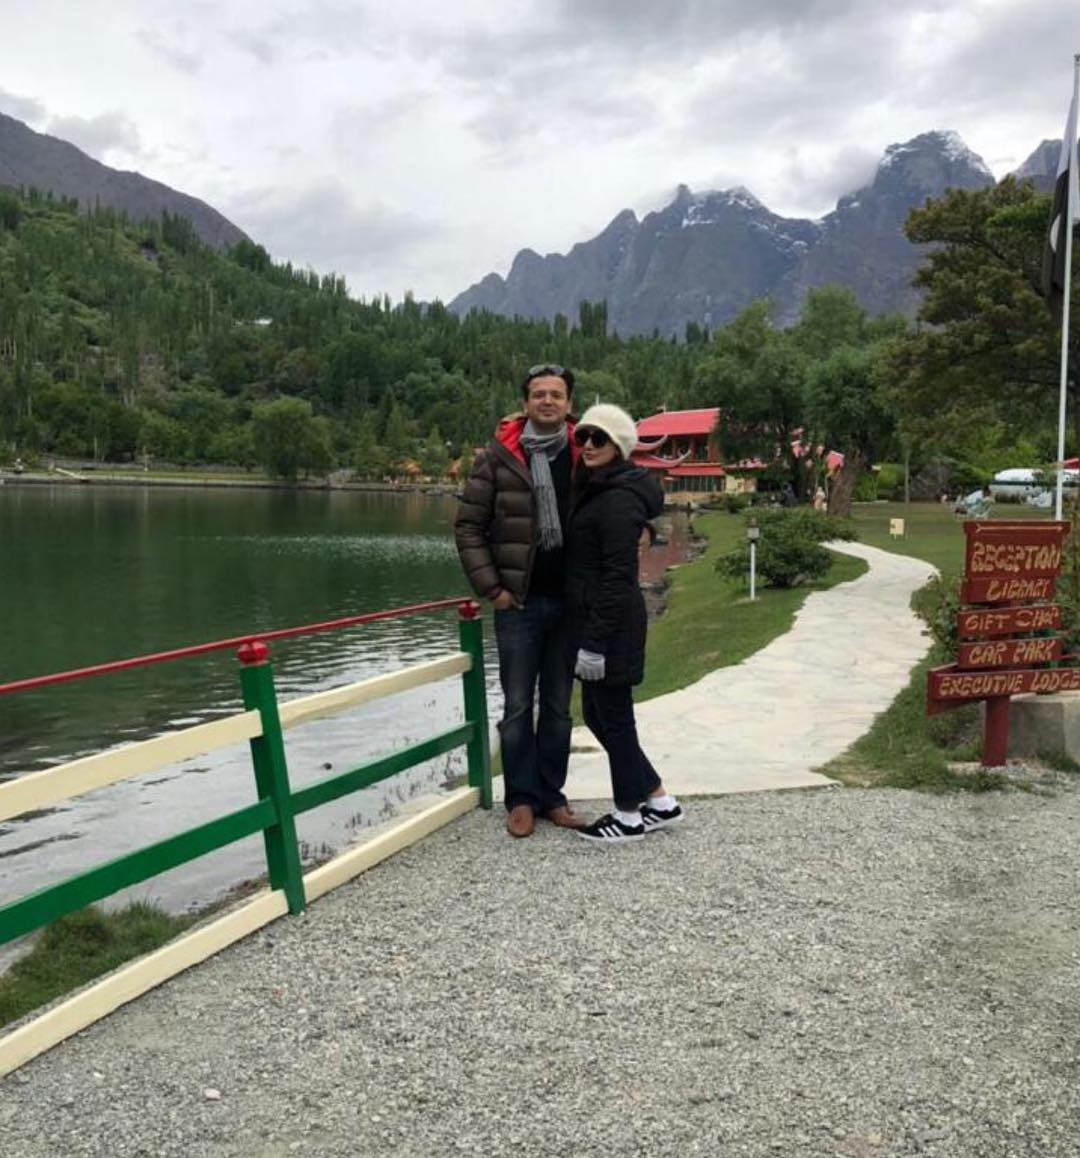 Ayesha Khan First Time Shared some Awesome Photos with her Husband